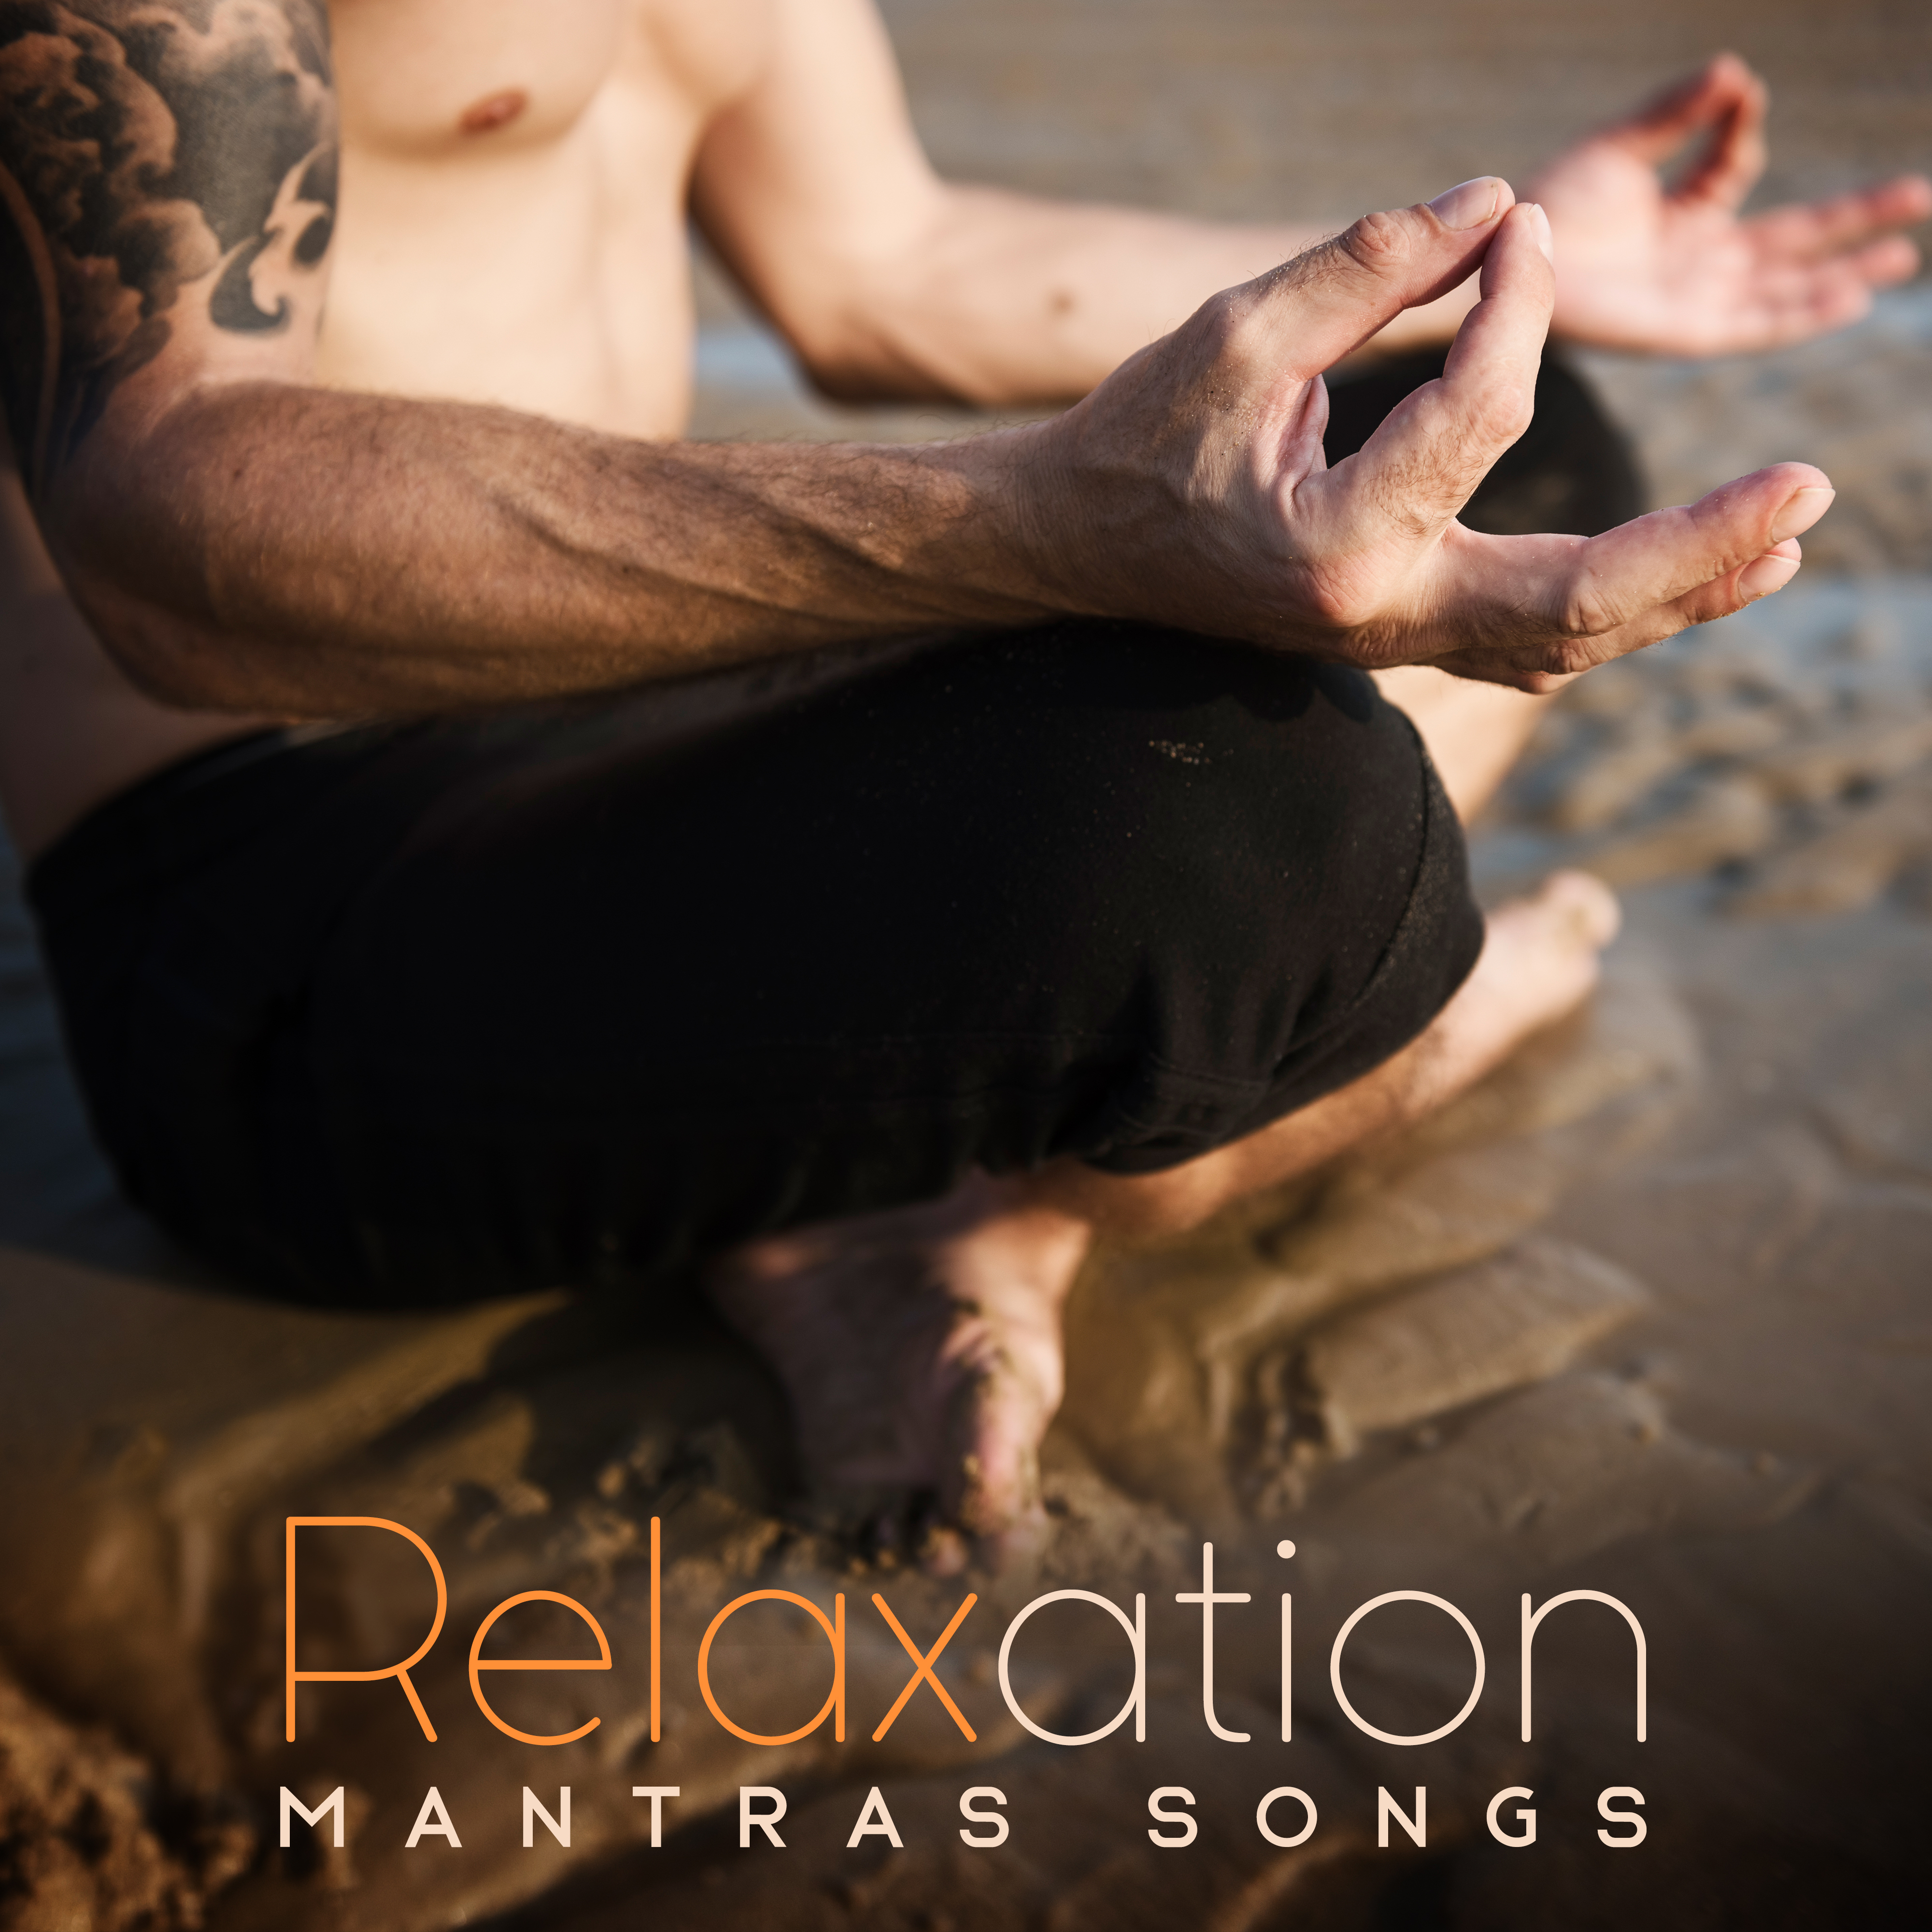 Relaxation Mantras Songs